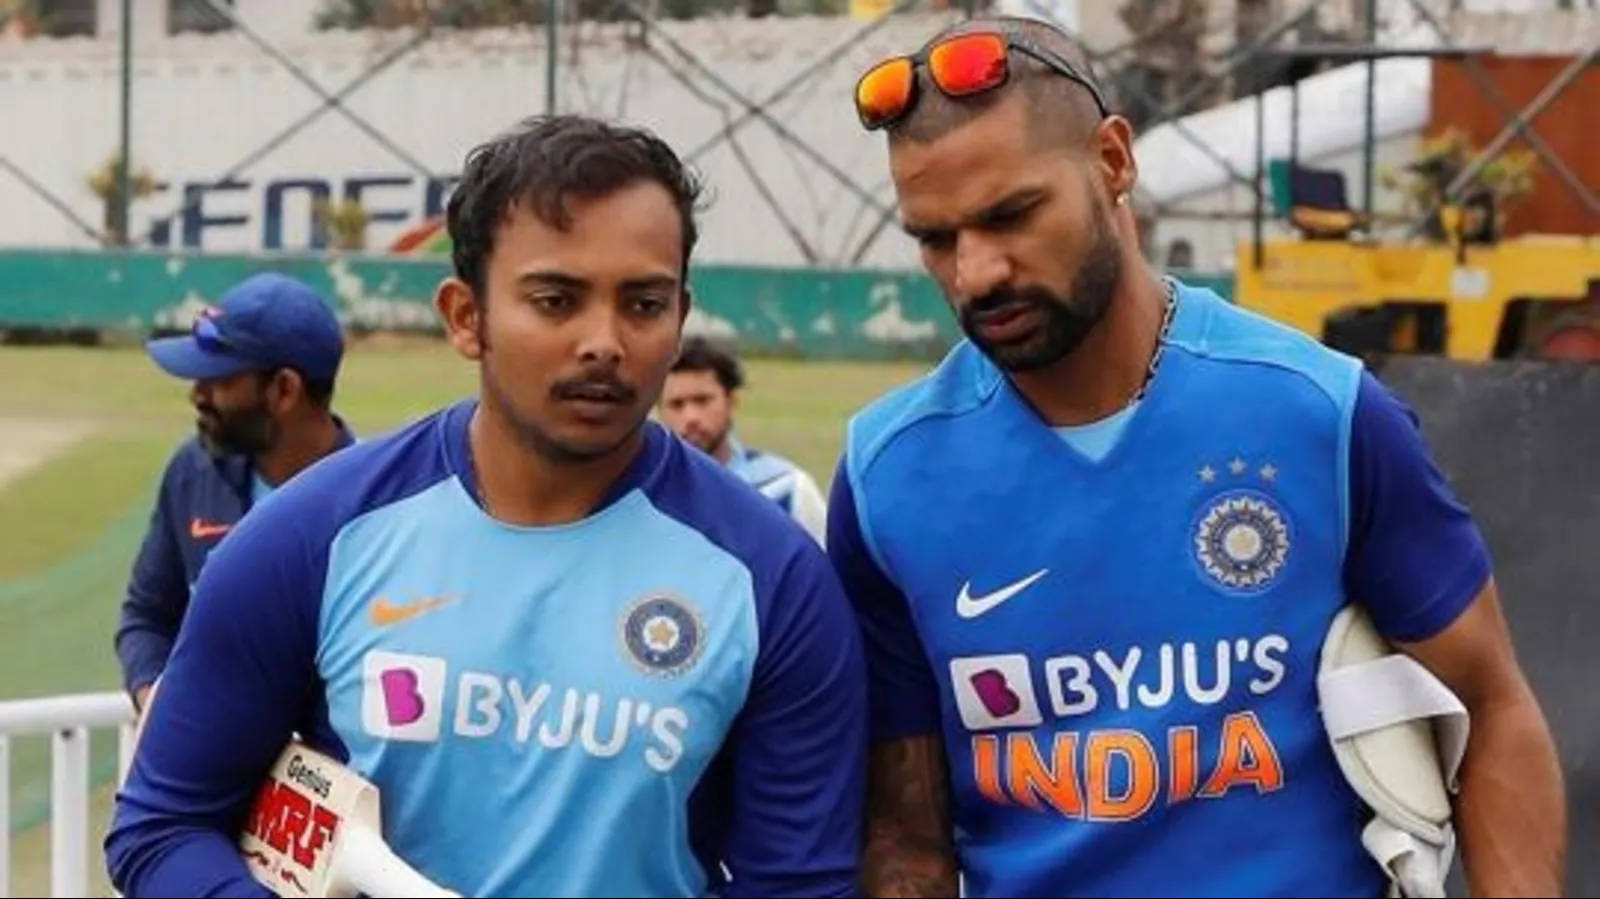 SL v IND 2021: Prithvi Shaw talks about the bond he shares with Shikhar Dhawan